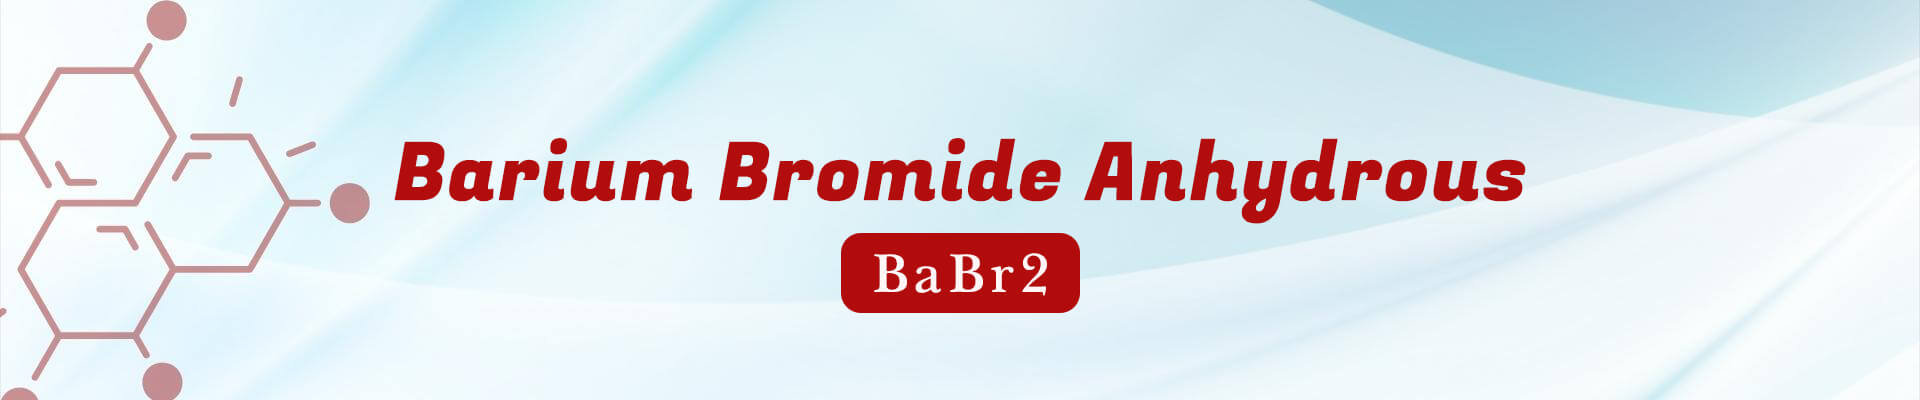 Barium Bromide Anhydrous 